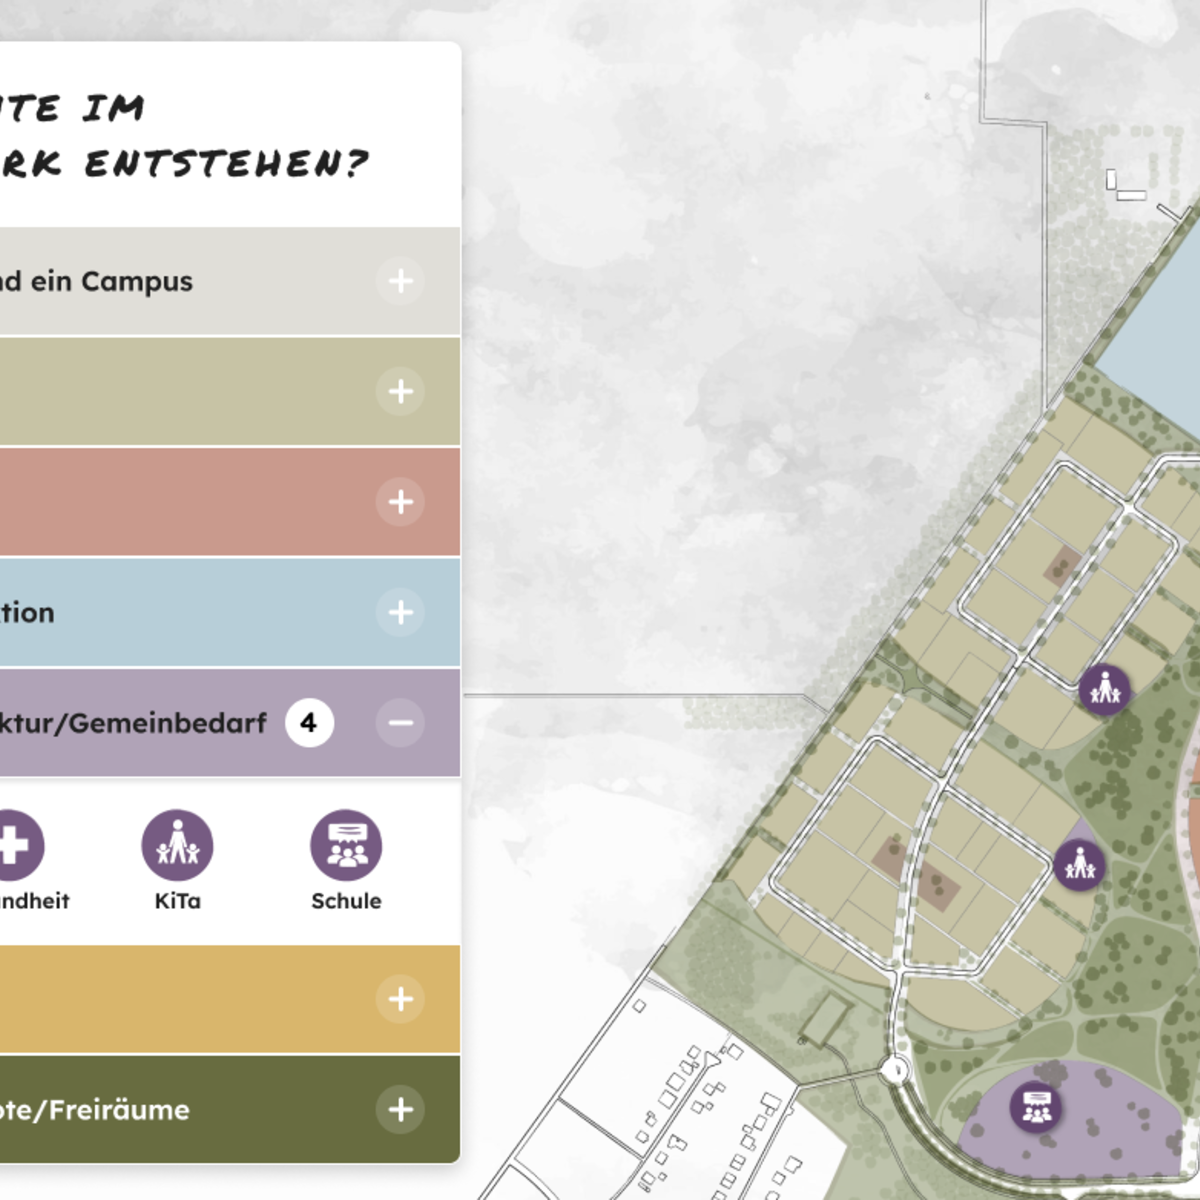 "An interactive map allows visitors to the site to locate the individual uses in "Königspark" 